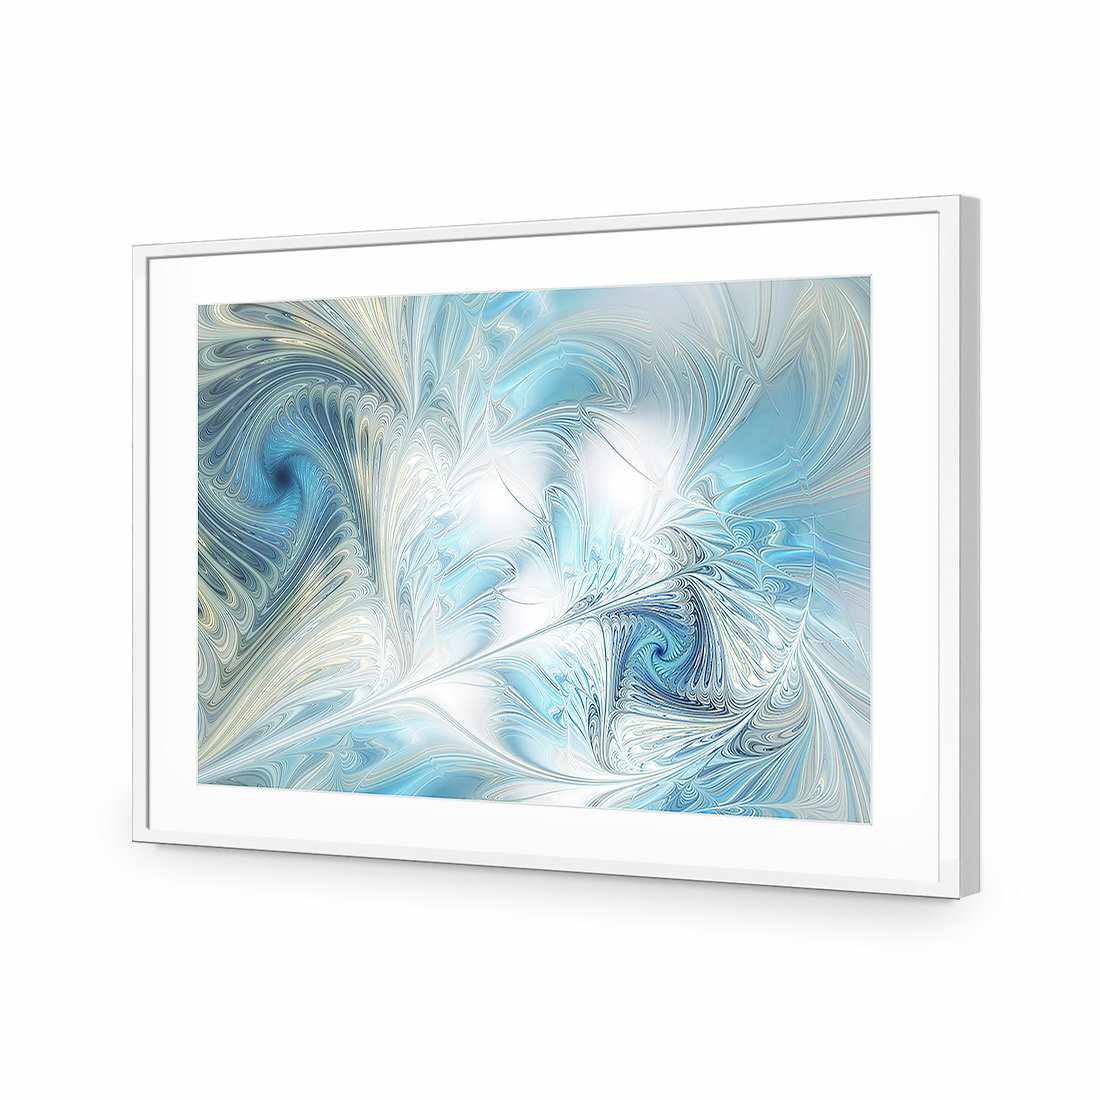 Travesty-Acrylic-Wall Art Design-With Border-Acrylic - White Frame-45x30cm-Wall Art Designs